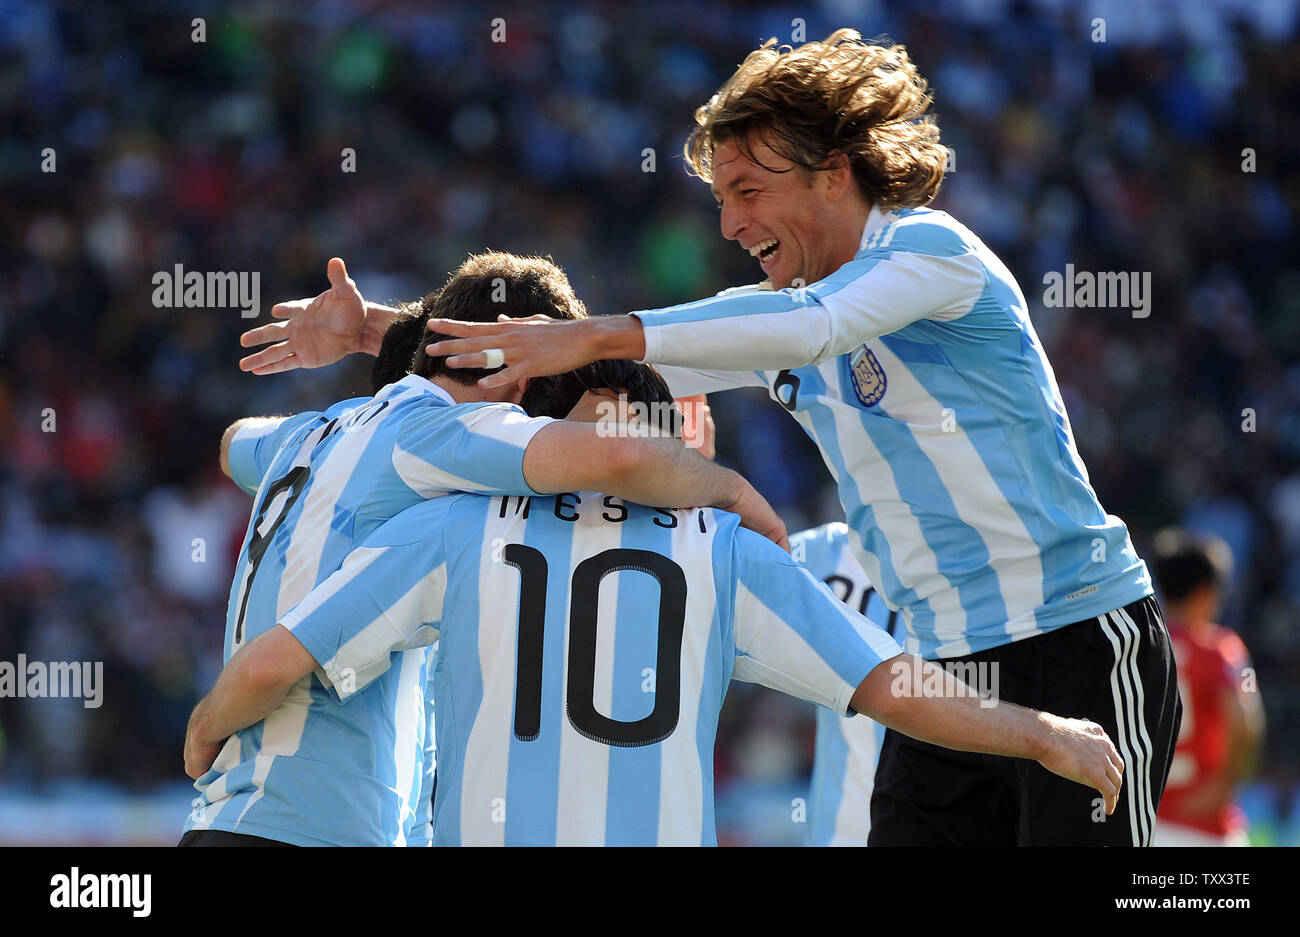 Gonzalo Higuain of Argentina is mobbed by his team-mates after scoring his side's third goal during the Group B match at Soccer City Stadium in Johannesburg, South Africa on June 17, 2010. UPI/Chris Brunskill Stock Photo